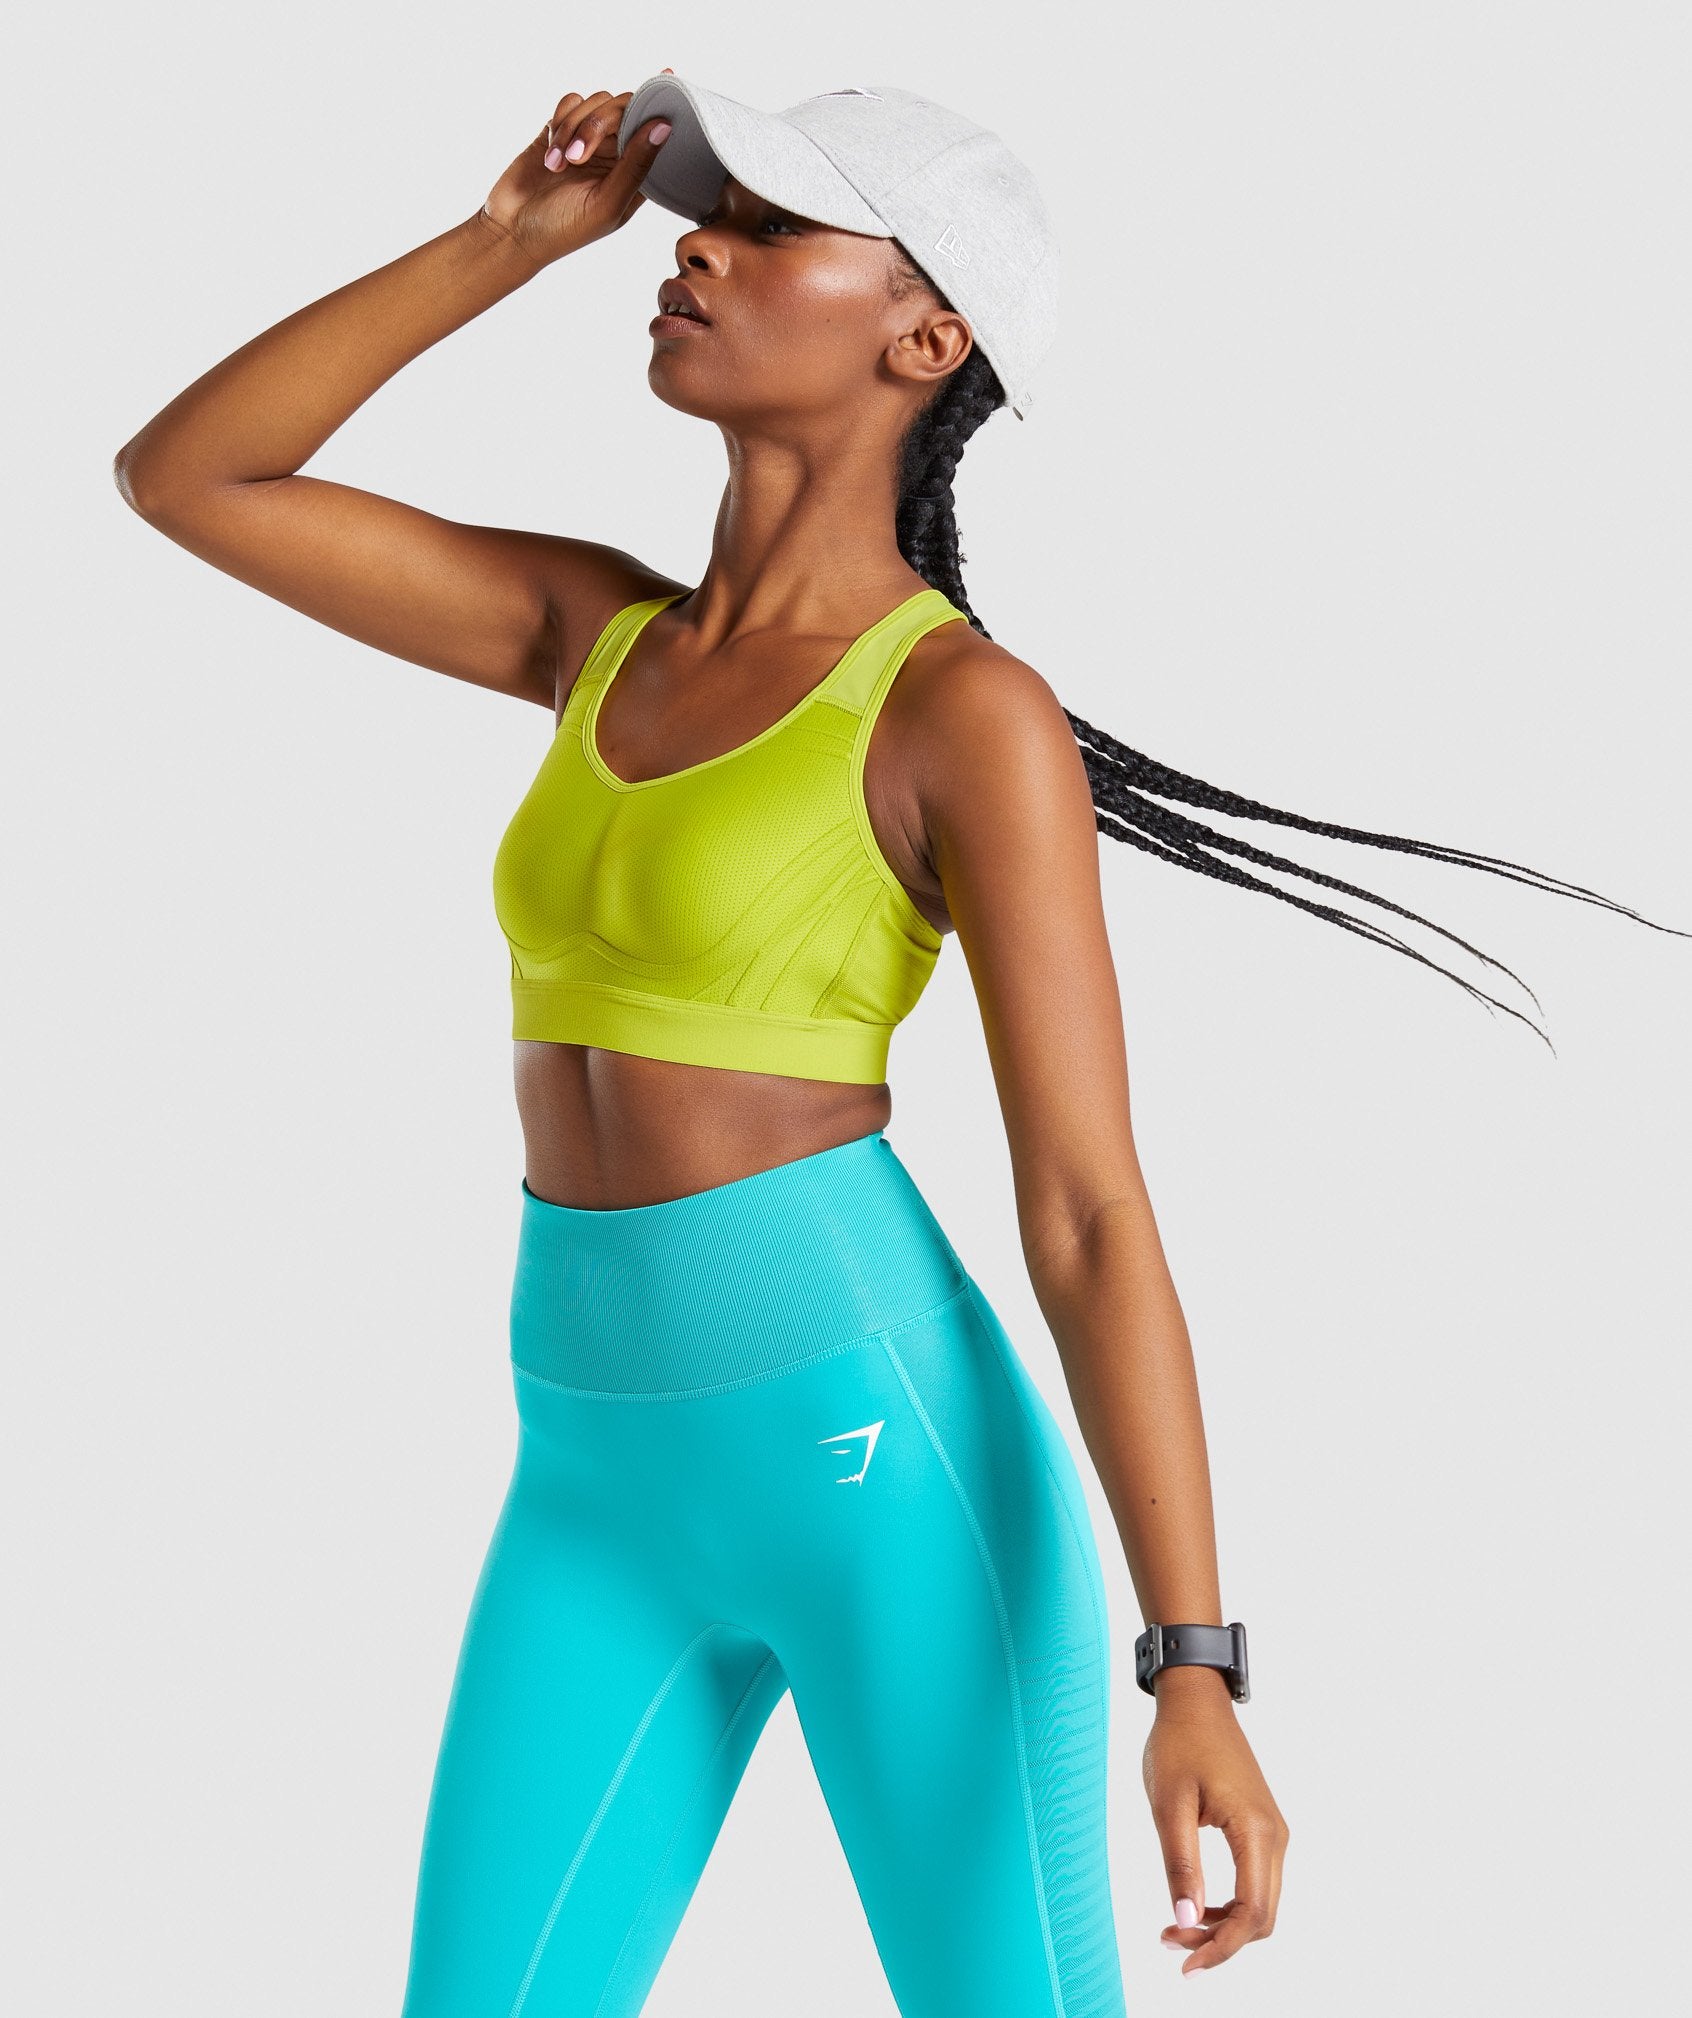 Apex Sports Bra in Lime - view 1